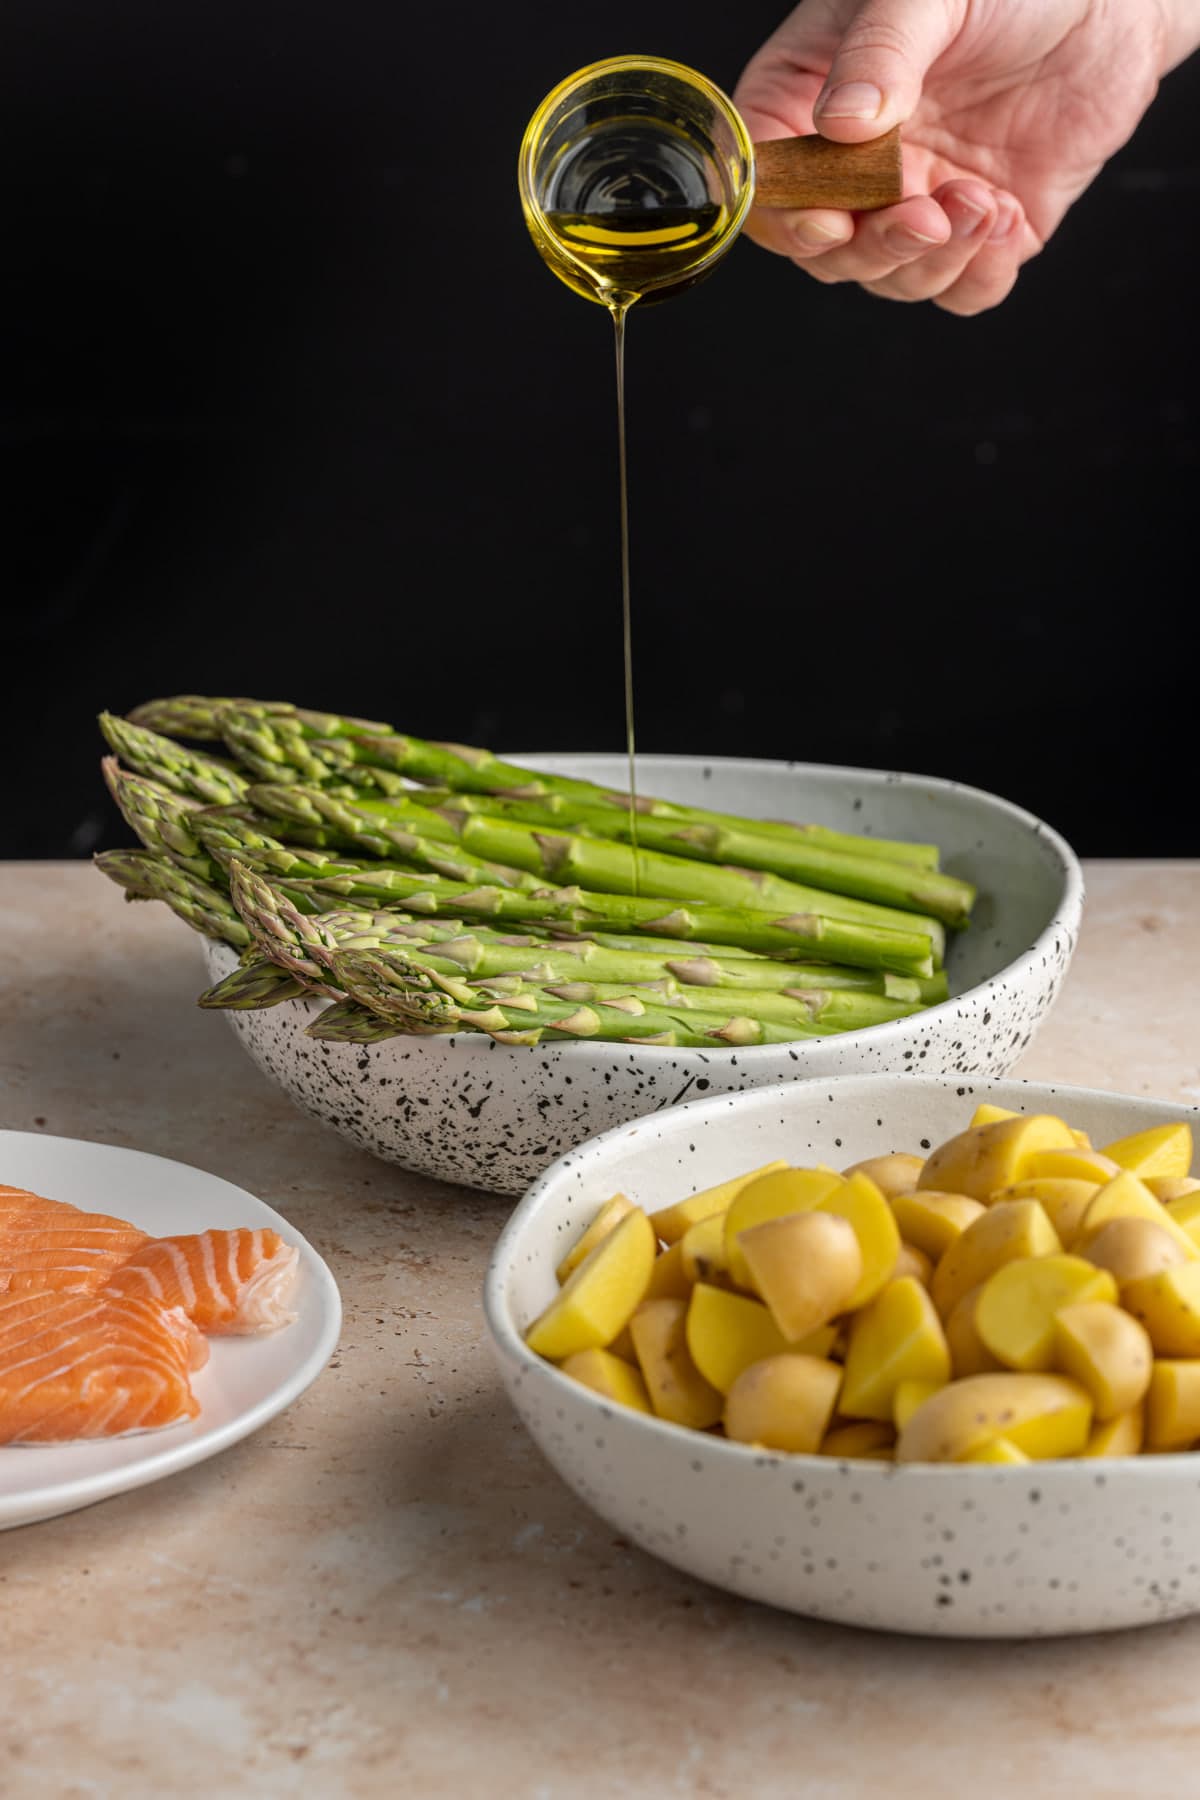 Adding olive oil to asparagus, potatoes, and salmon